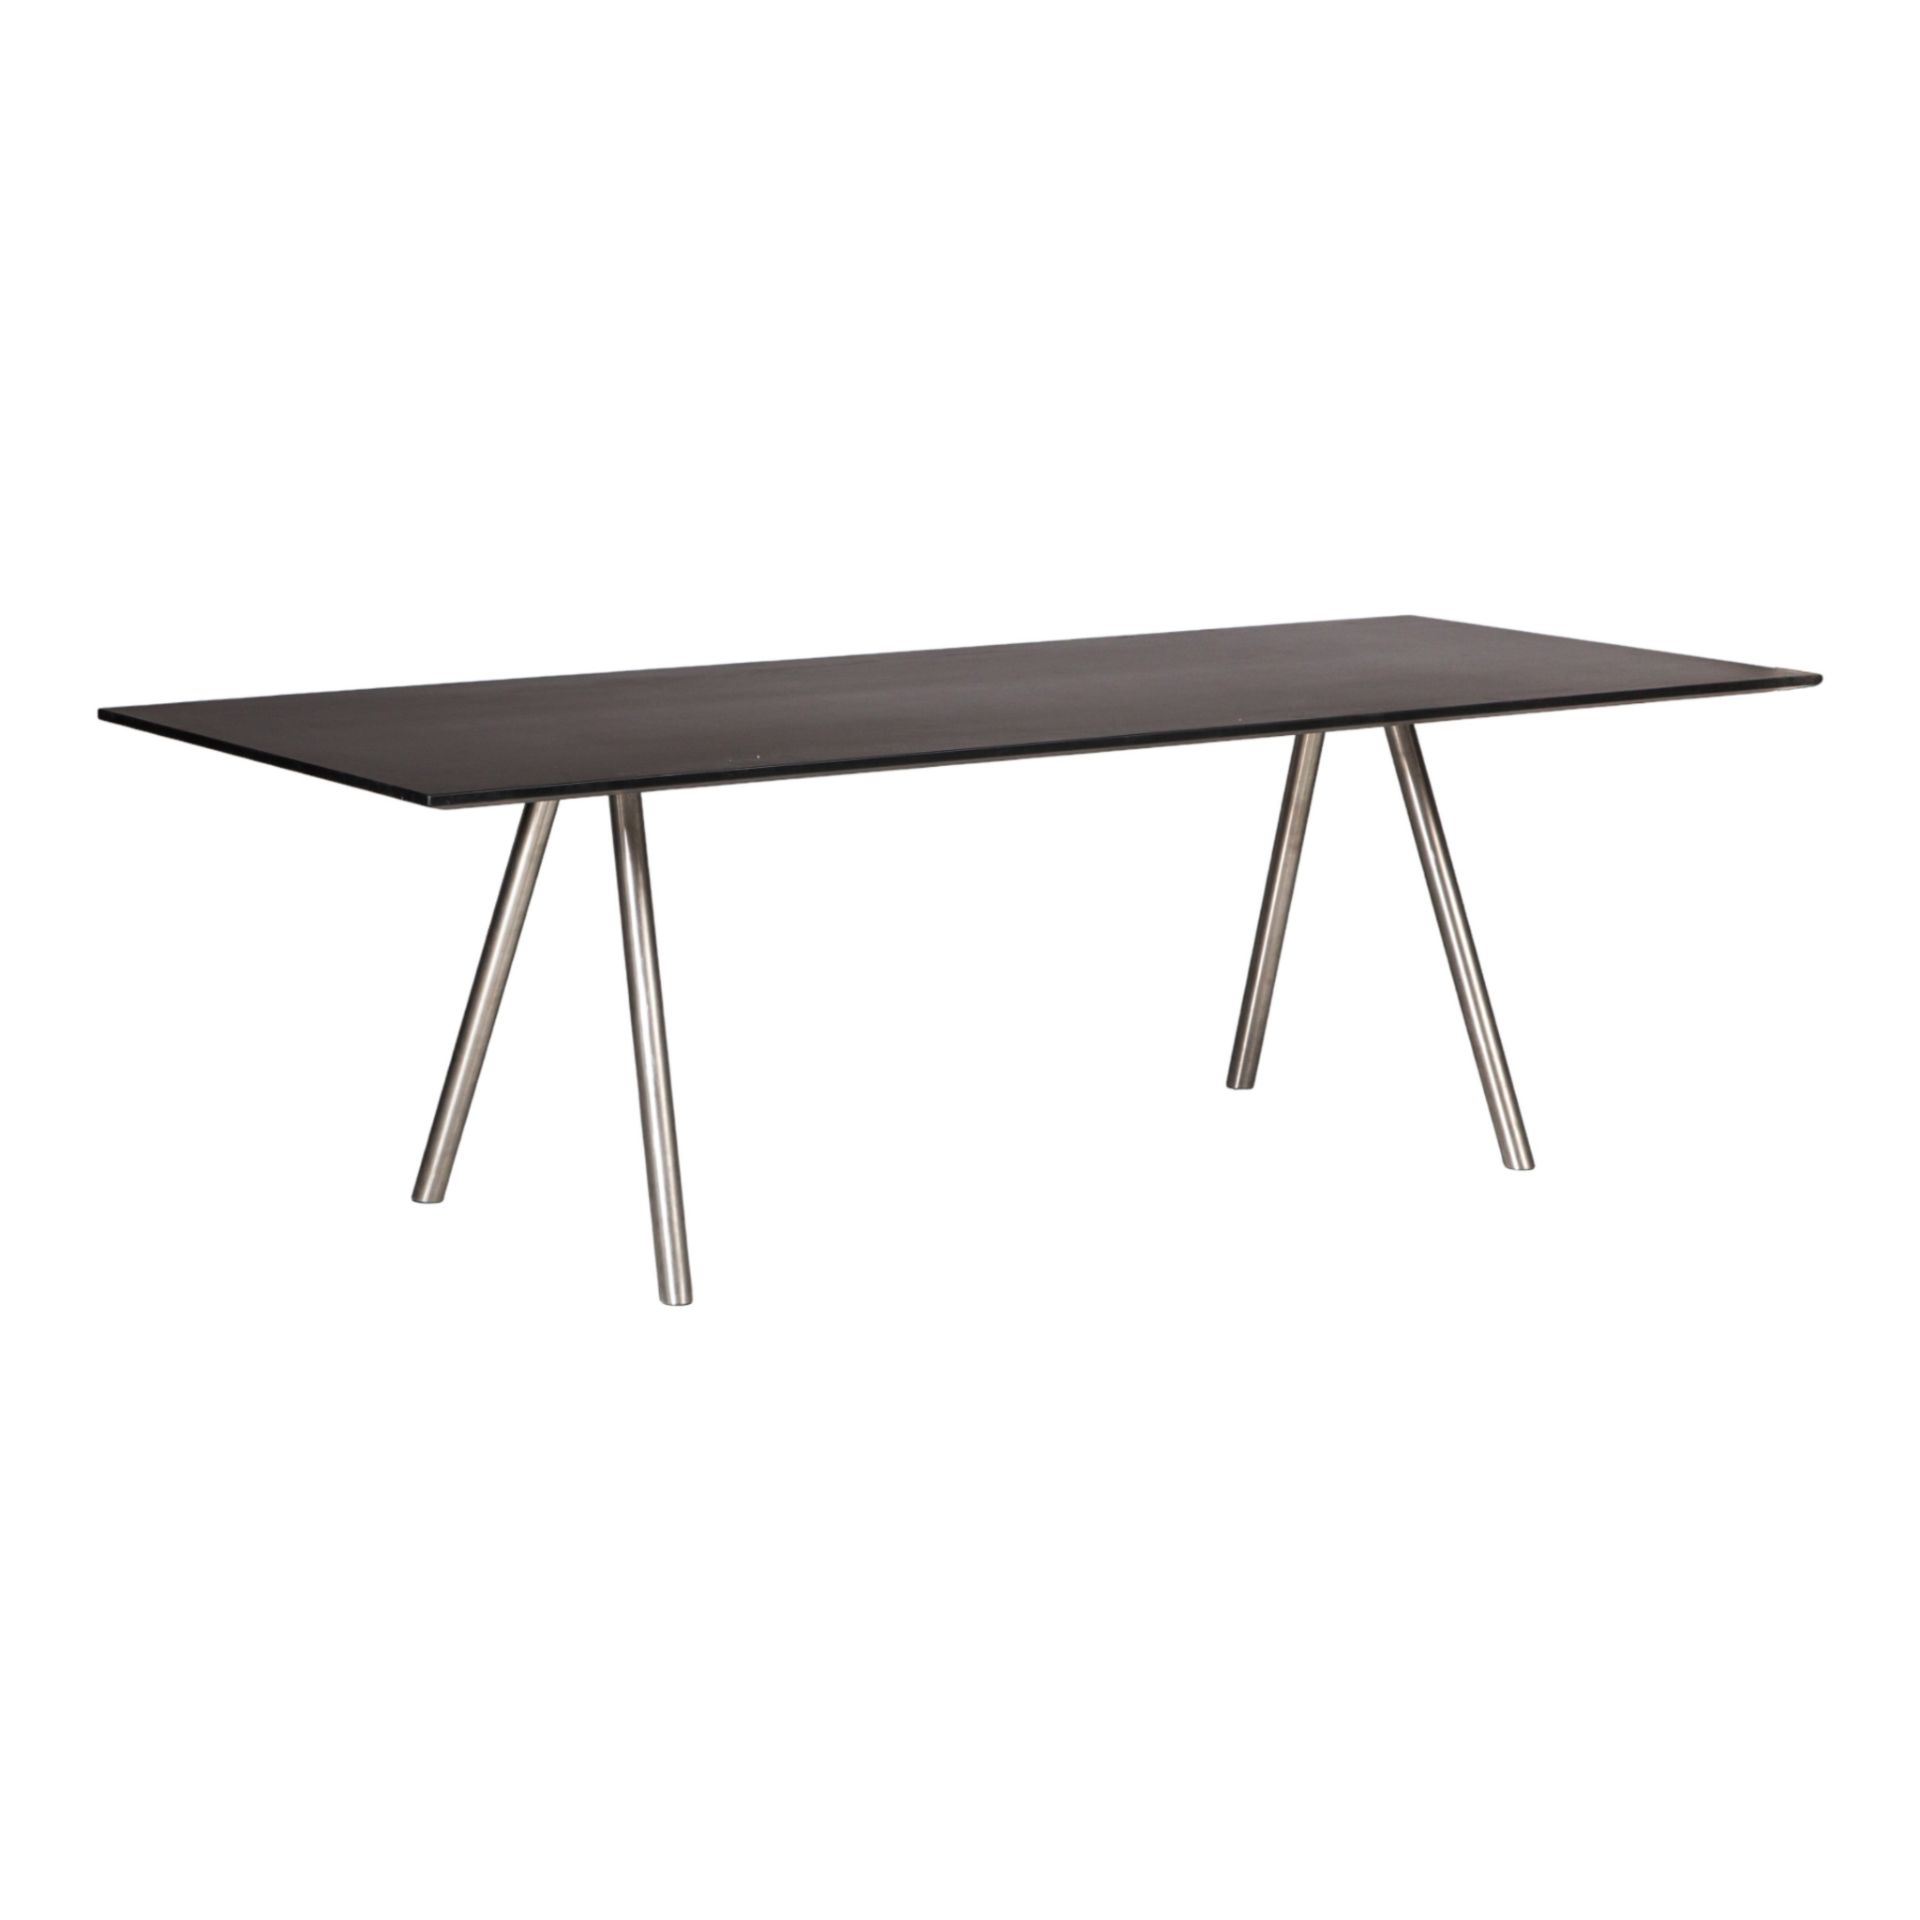 An A-Table by Maarten van Severen for Vitra, H 72,5 - W 240 - D 90 cm - Image 12 of 22